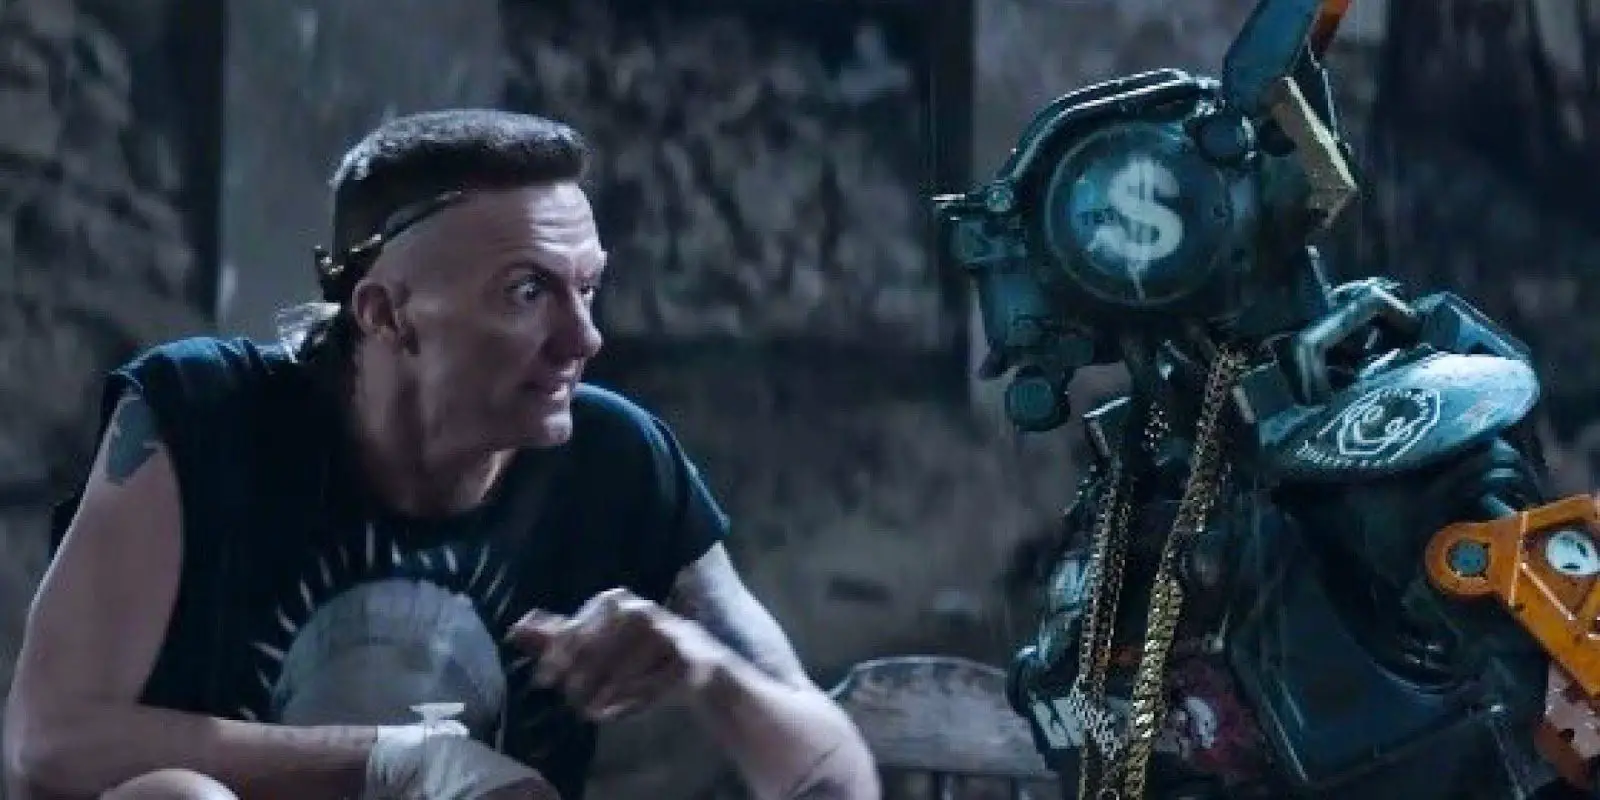 Ninja has a quiet moment with Chappie, explaining how he needs to help with the heist to get a new body